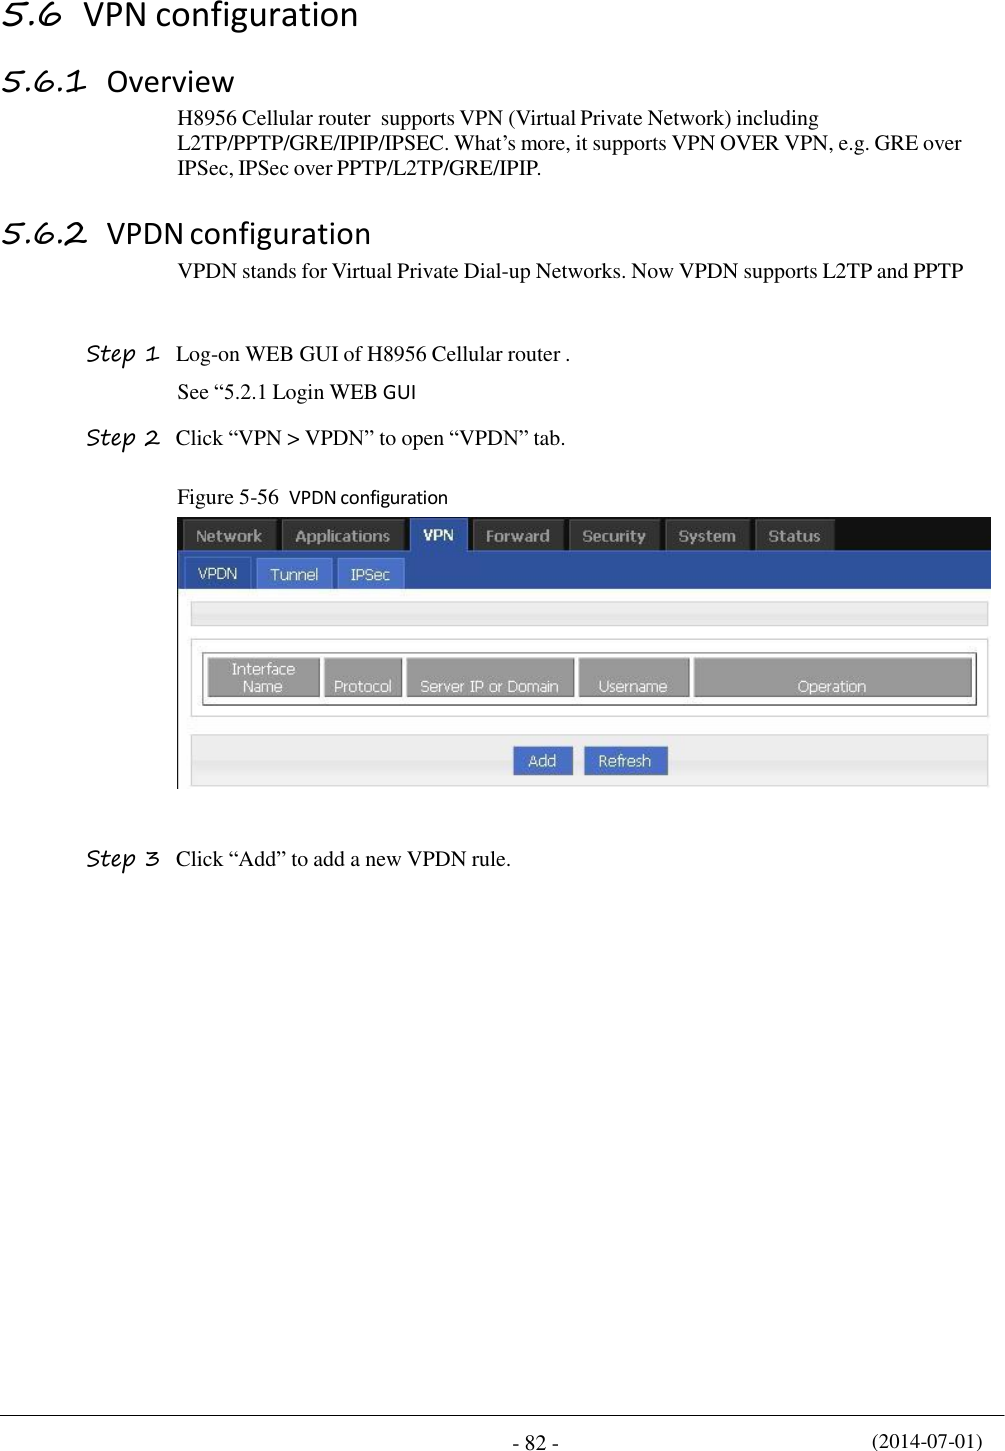 (2014-07-01) - 82 -    5.6 VPN configuration  5.6.1 Overview H8956 Cellular router  supports VPN (Virtual Private Network) including L2TP/PPTP/GRE/IPIP/IPSEC. What’s more, it supports VPN OVER VPN, e.g. GRE over IPSec, IPSec over PPTP/L2TP/GRE/IPIP.  5.6.2 VPDN configuration VPDN stands for Virtual Private Dial-up Networks. Now VPDN supports L2TP and PPTP   Step 1  Log-on WEB GUI of H8956 Cellular router . See “5.2.1 Login WEB GUI  Step 2  Click “VPN &gt; VPDN” to open “VPDN” tab.  Figure 5-56  VPDN configuration    Step 3  Click “Add” to add a new VPDN rule. 